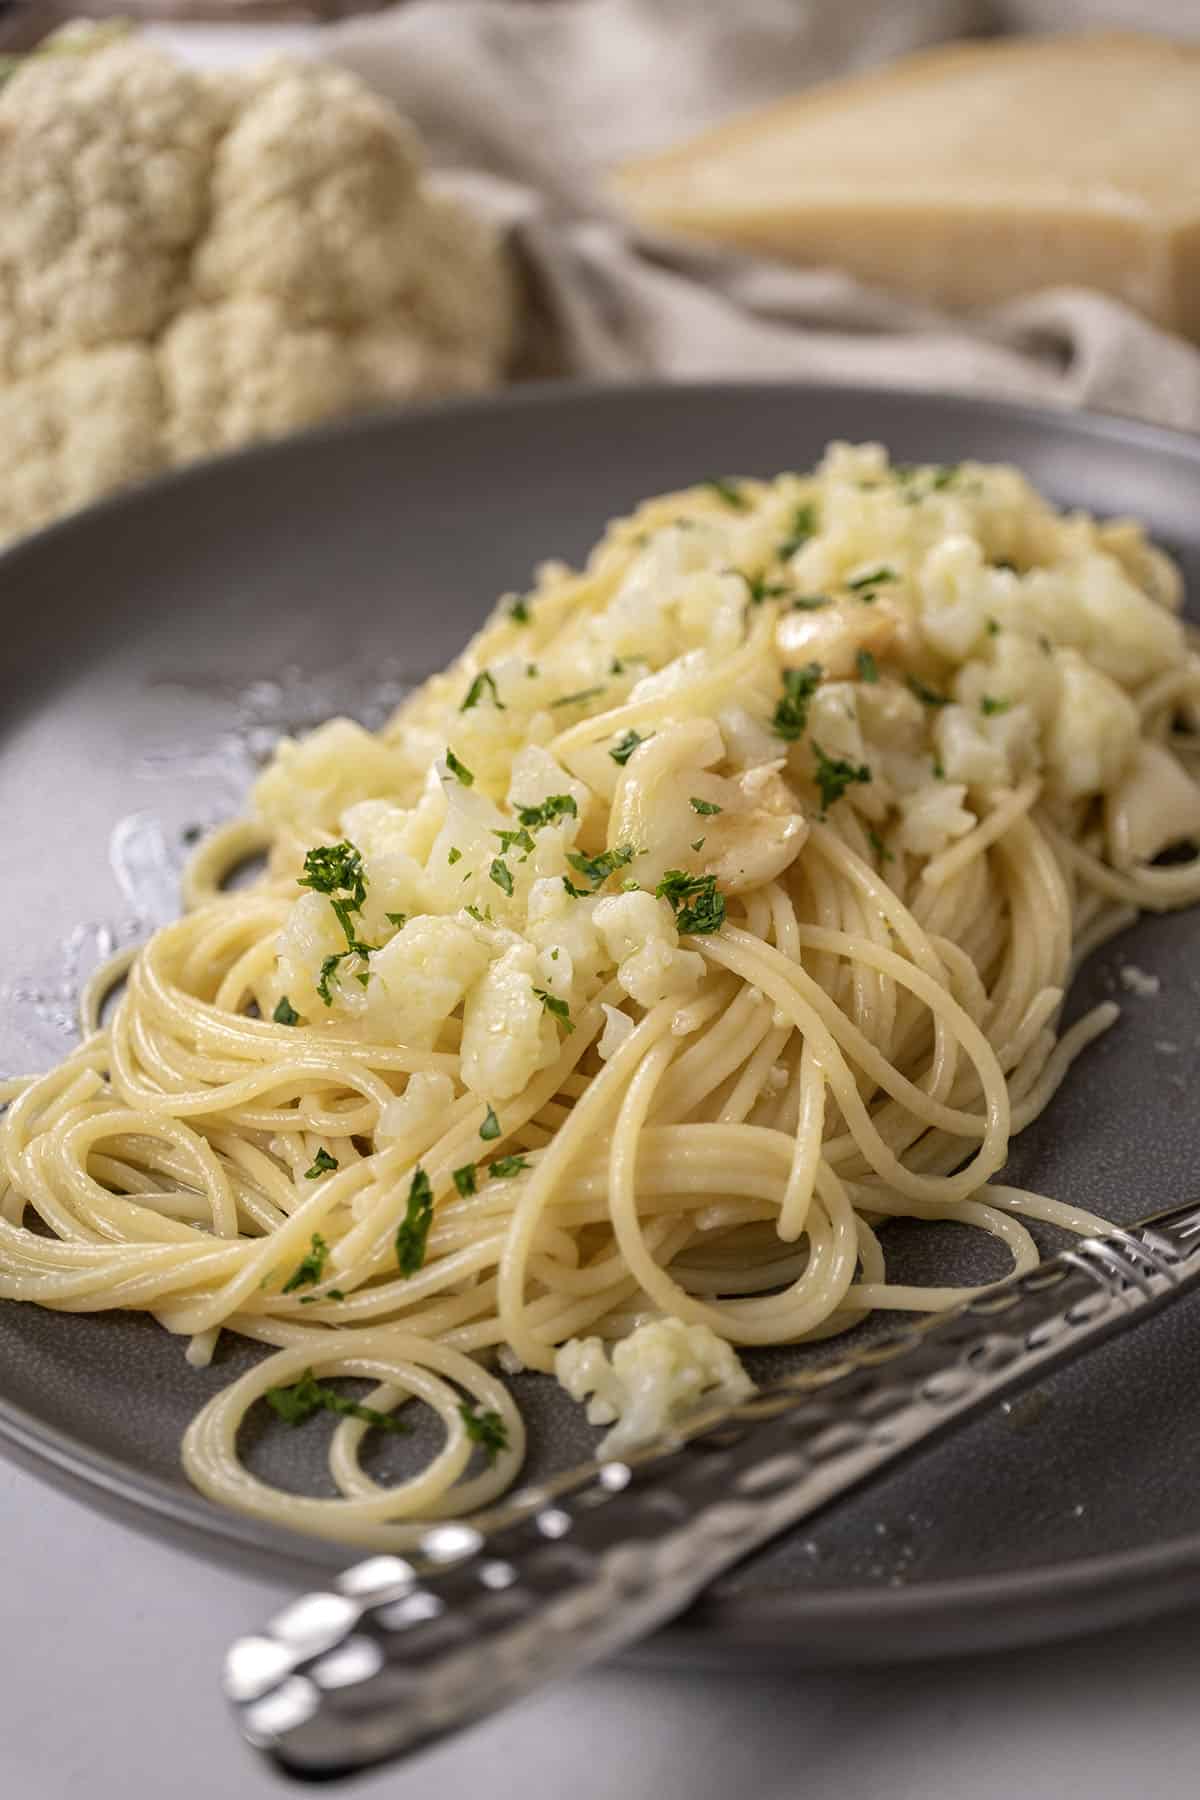 spaghetti with cauliflower plated on a dish garnished with parsley.